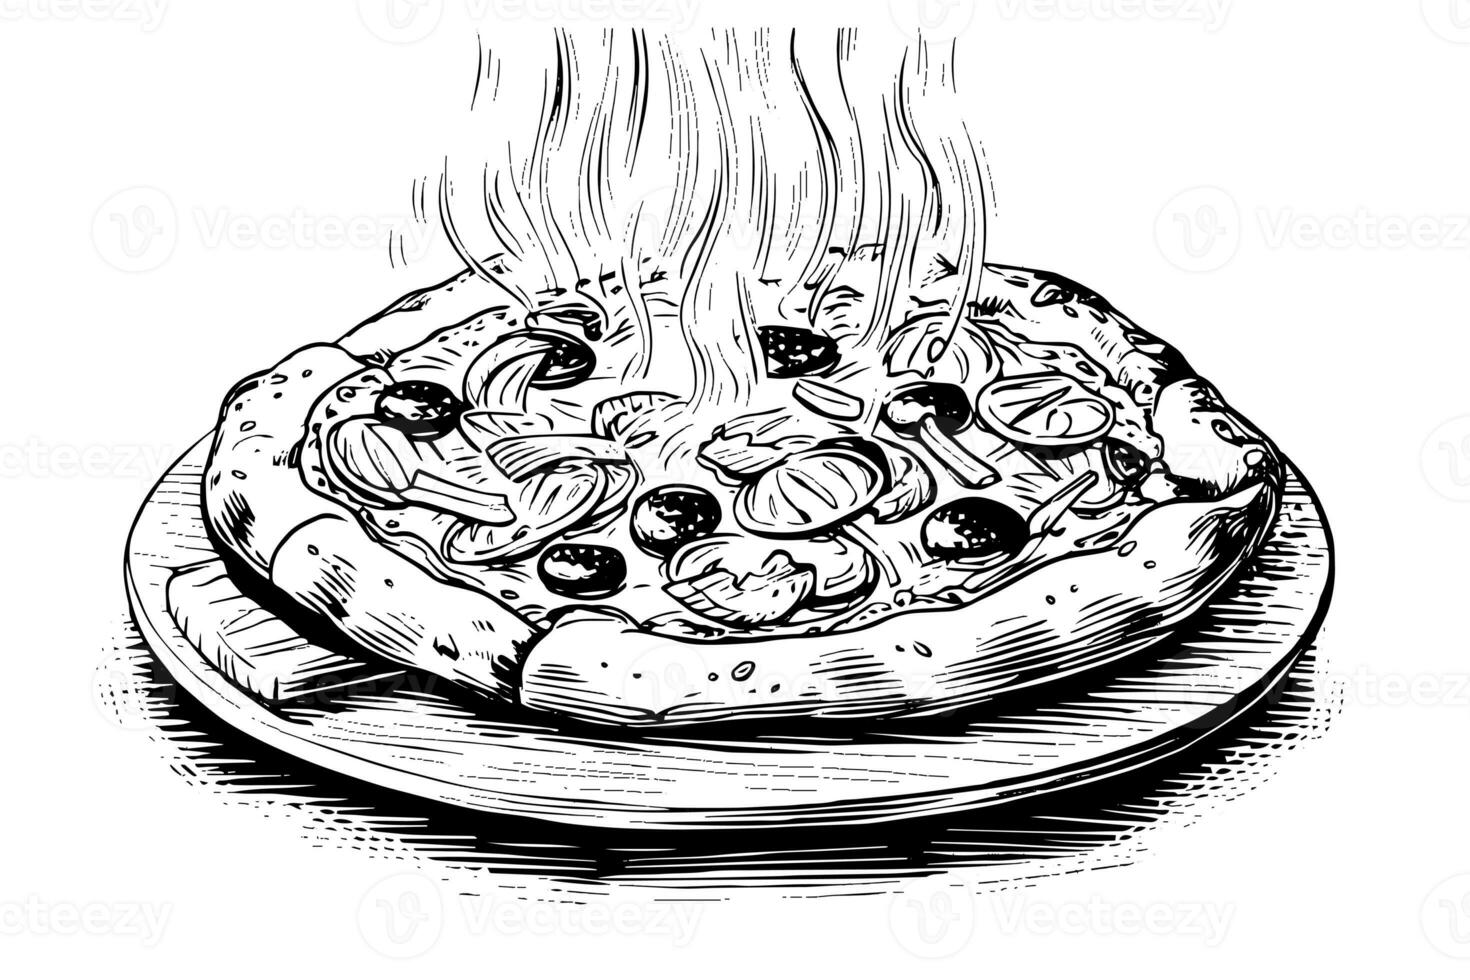 Hot pizza from the oven sketch hand drawn engraving style Vector illustration photo